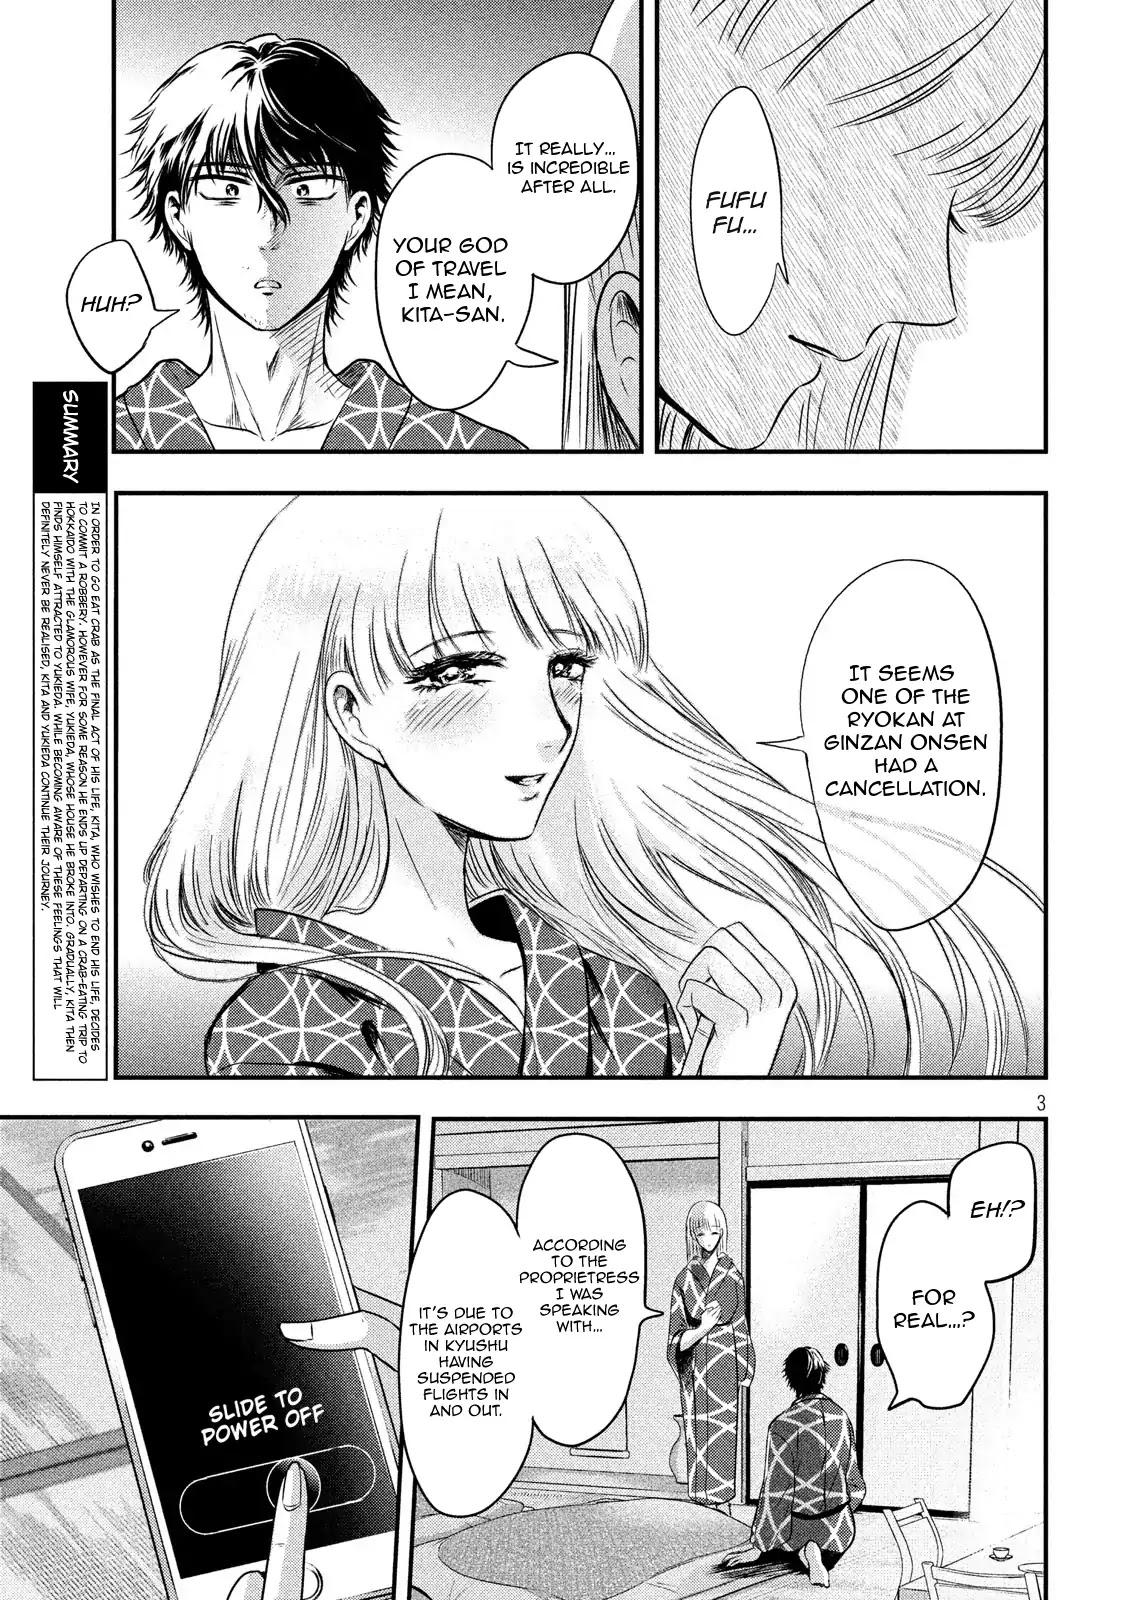 Eating Crab With A Yukionna Chapter 13: Gino0808 - Picture 3